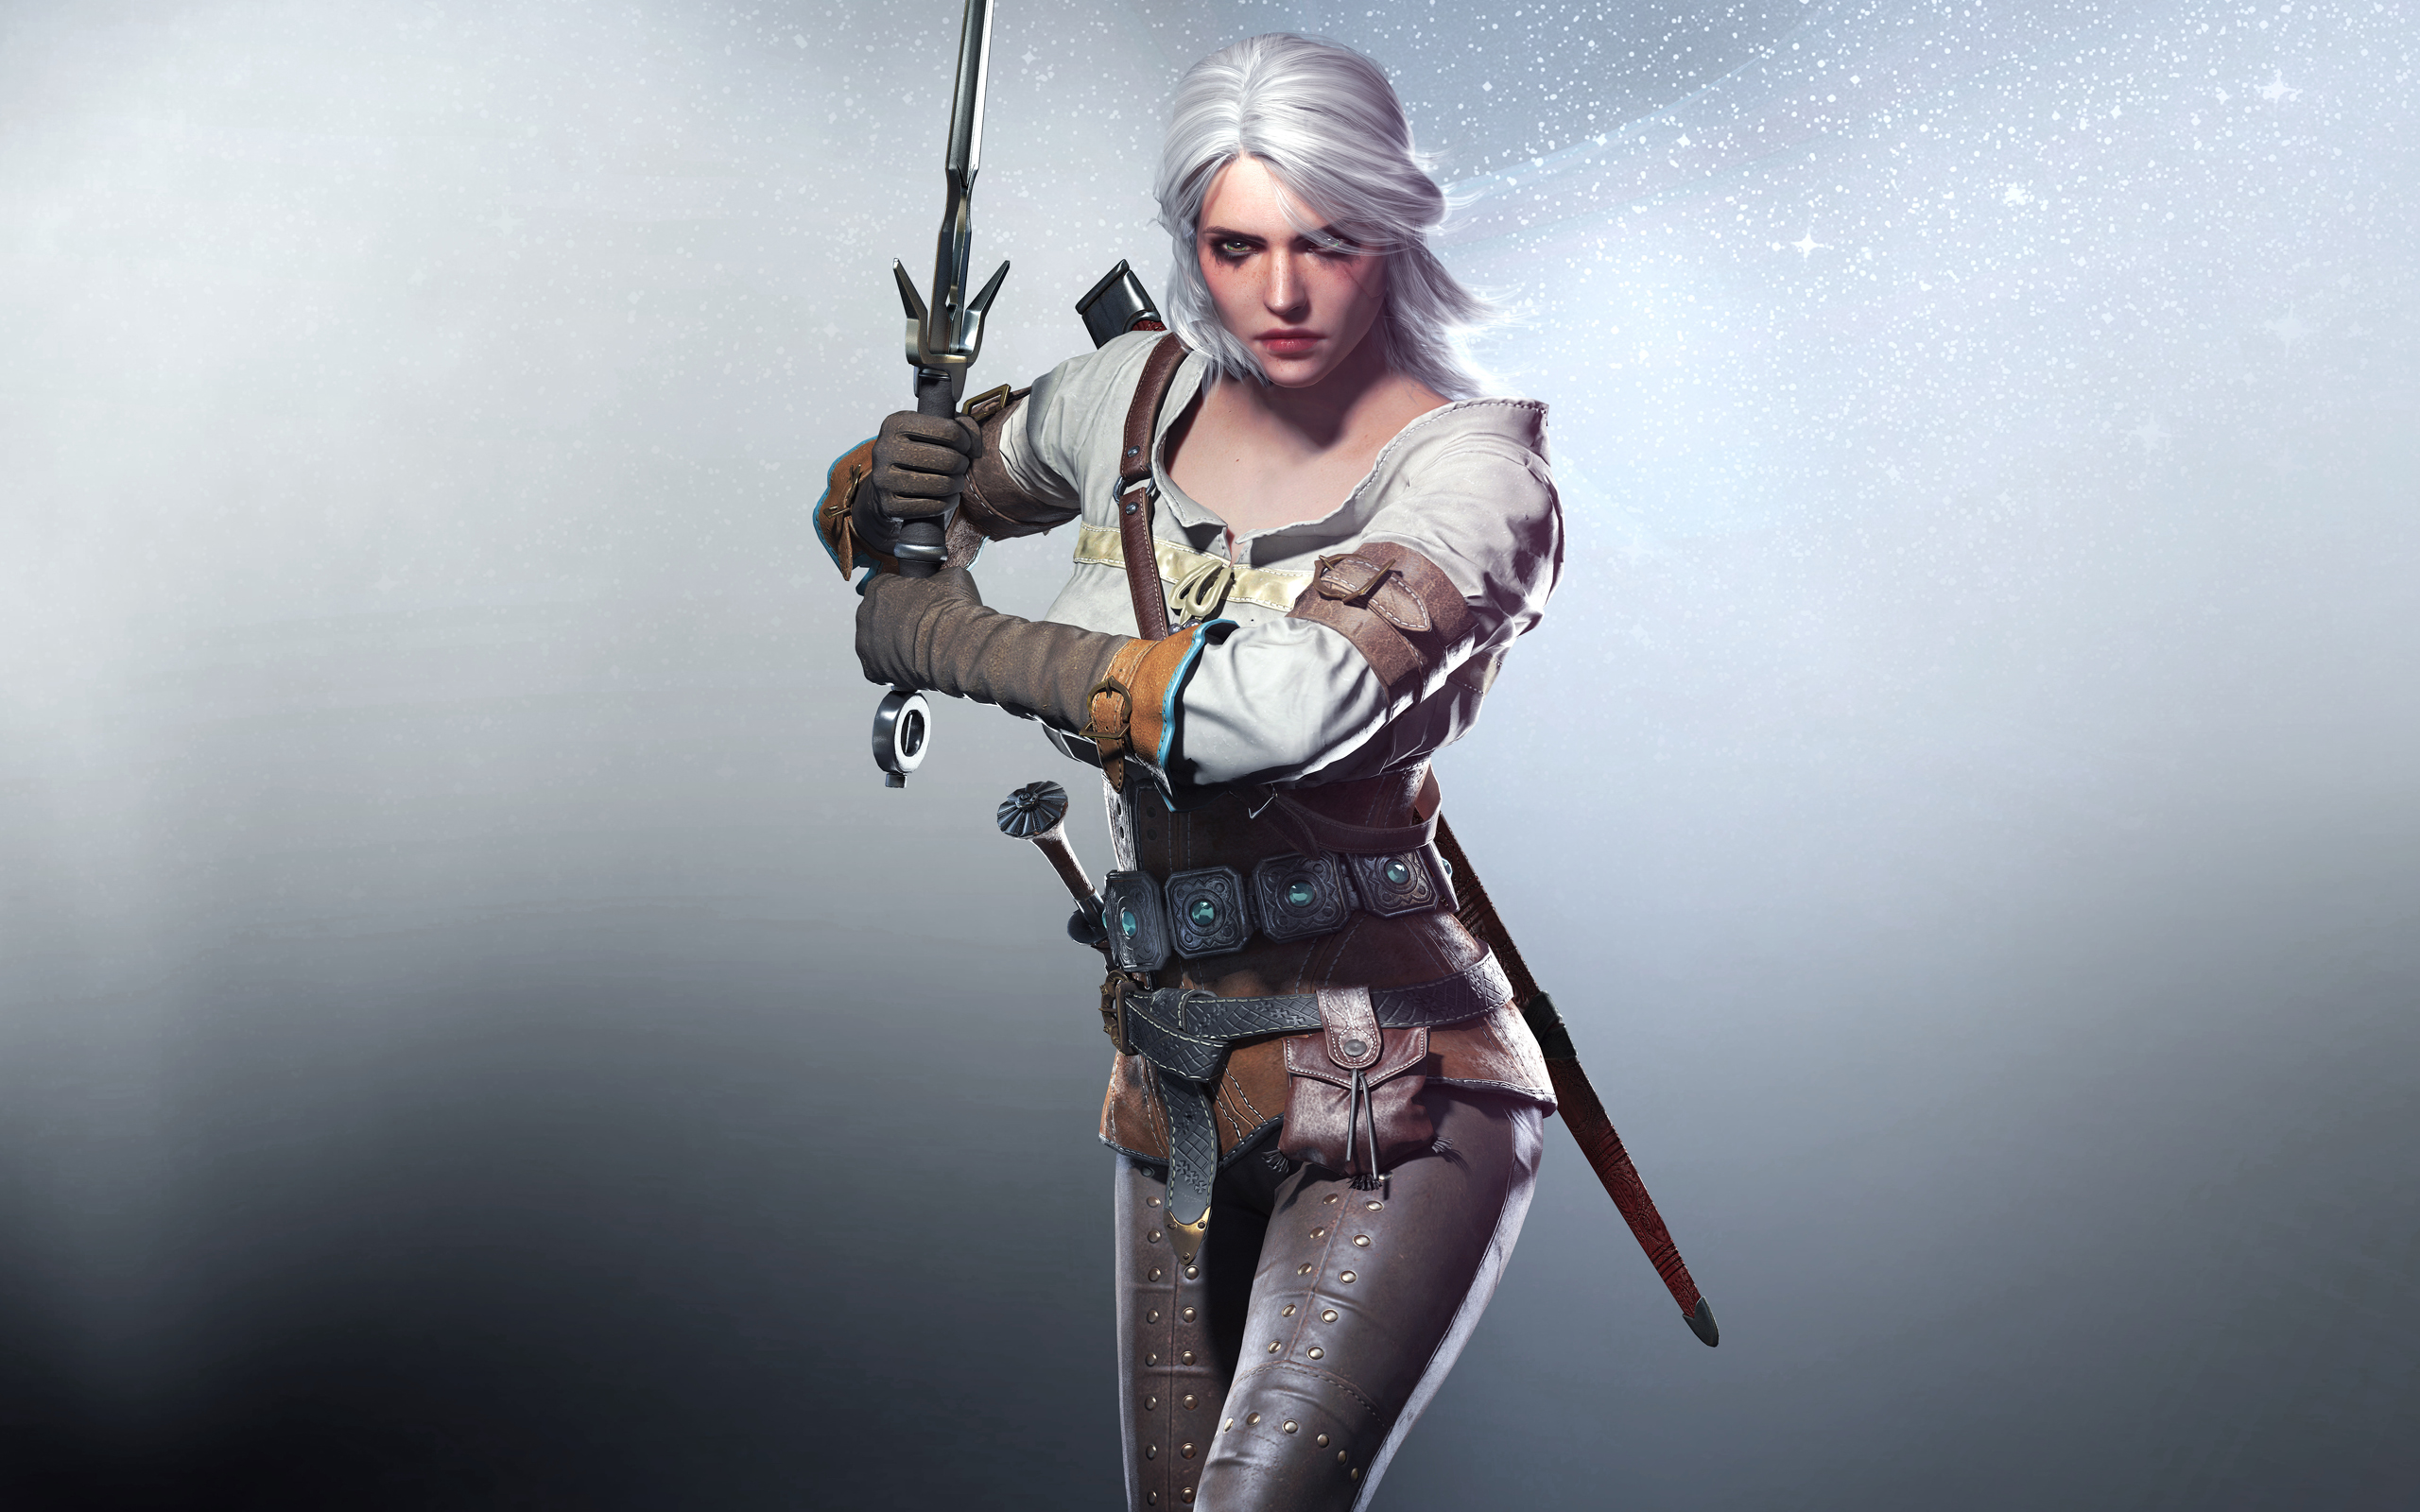 The Witcher 3: Wild Hunt HD Wallpaper